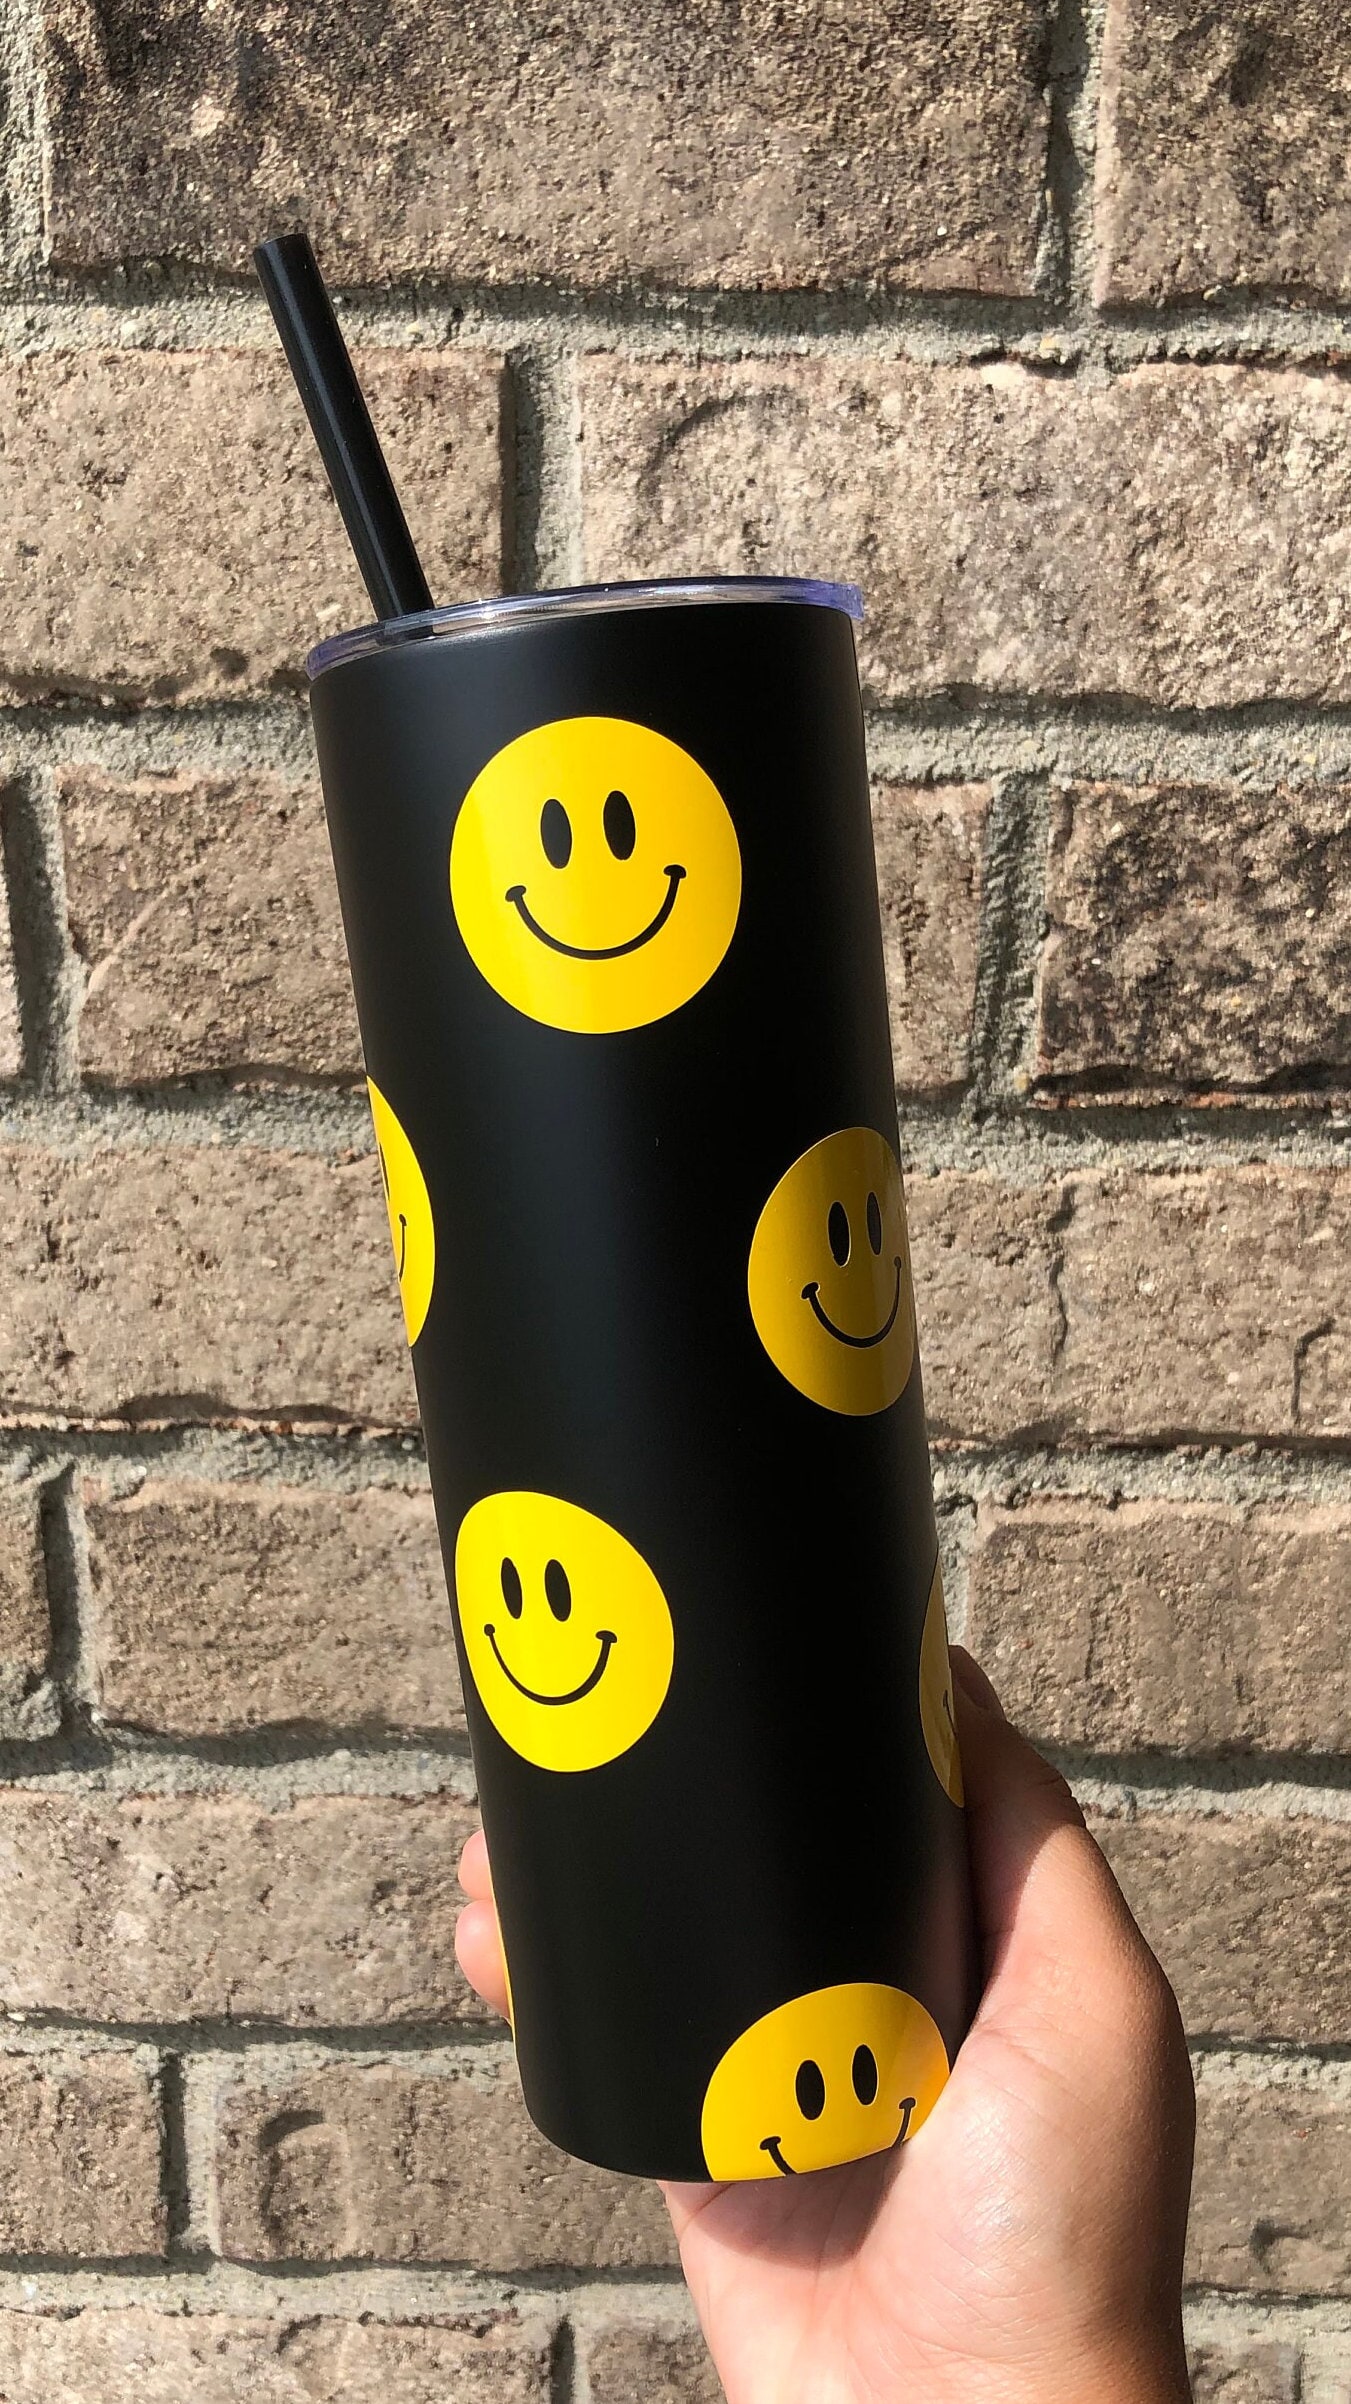 Zzkol Smiley Faces Tumbler with Lid and Straw, Colorful  Smiling Face Funny Stainless Steel Travel Coffee Cup, Cute Cartoon Birthday  Gifts for Women, 20oz Double Wall Vacuum Insulated Mug: Tumblers